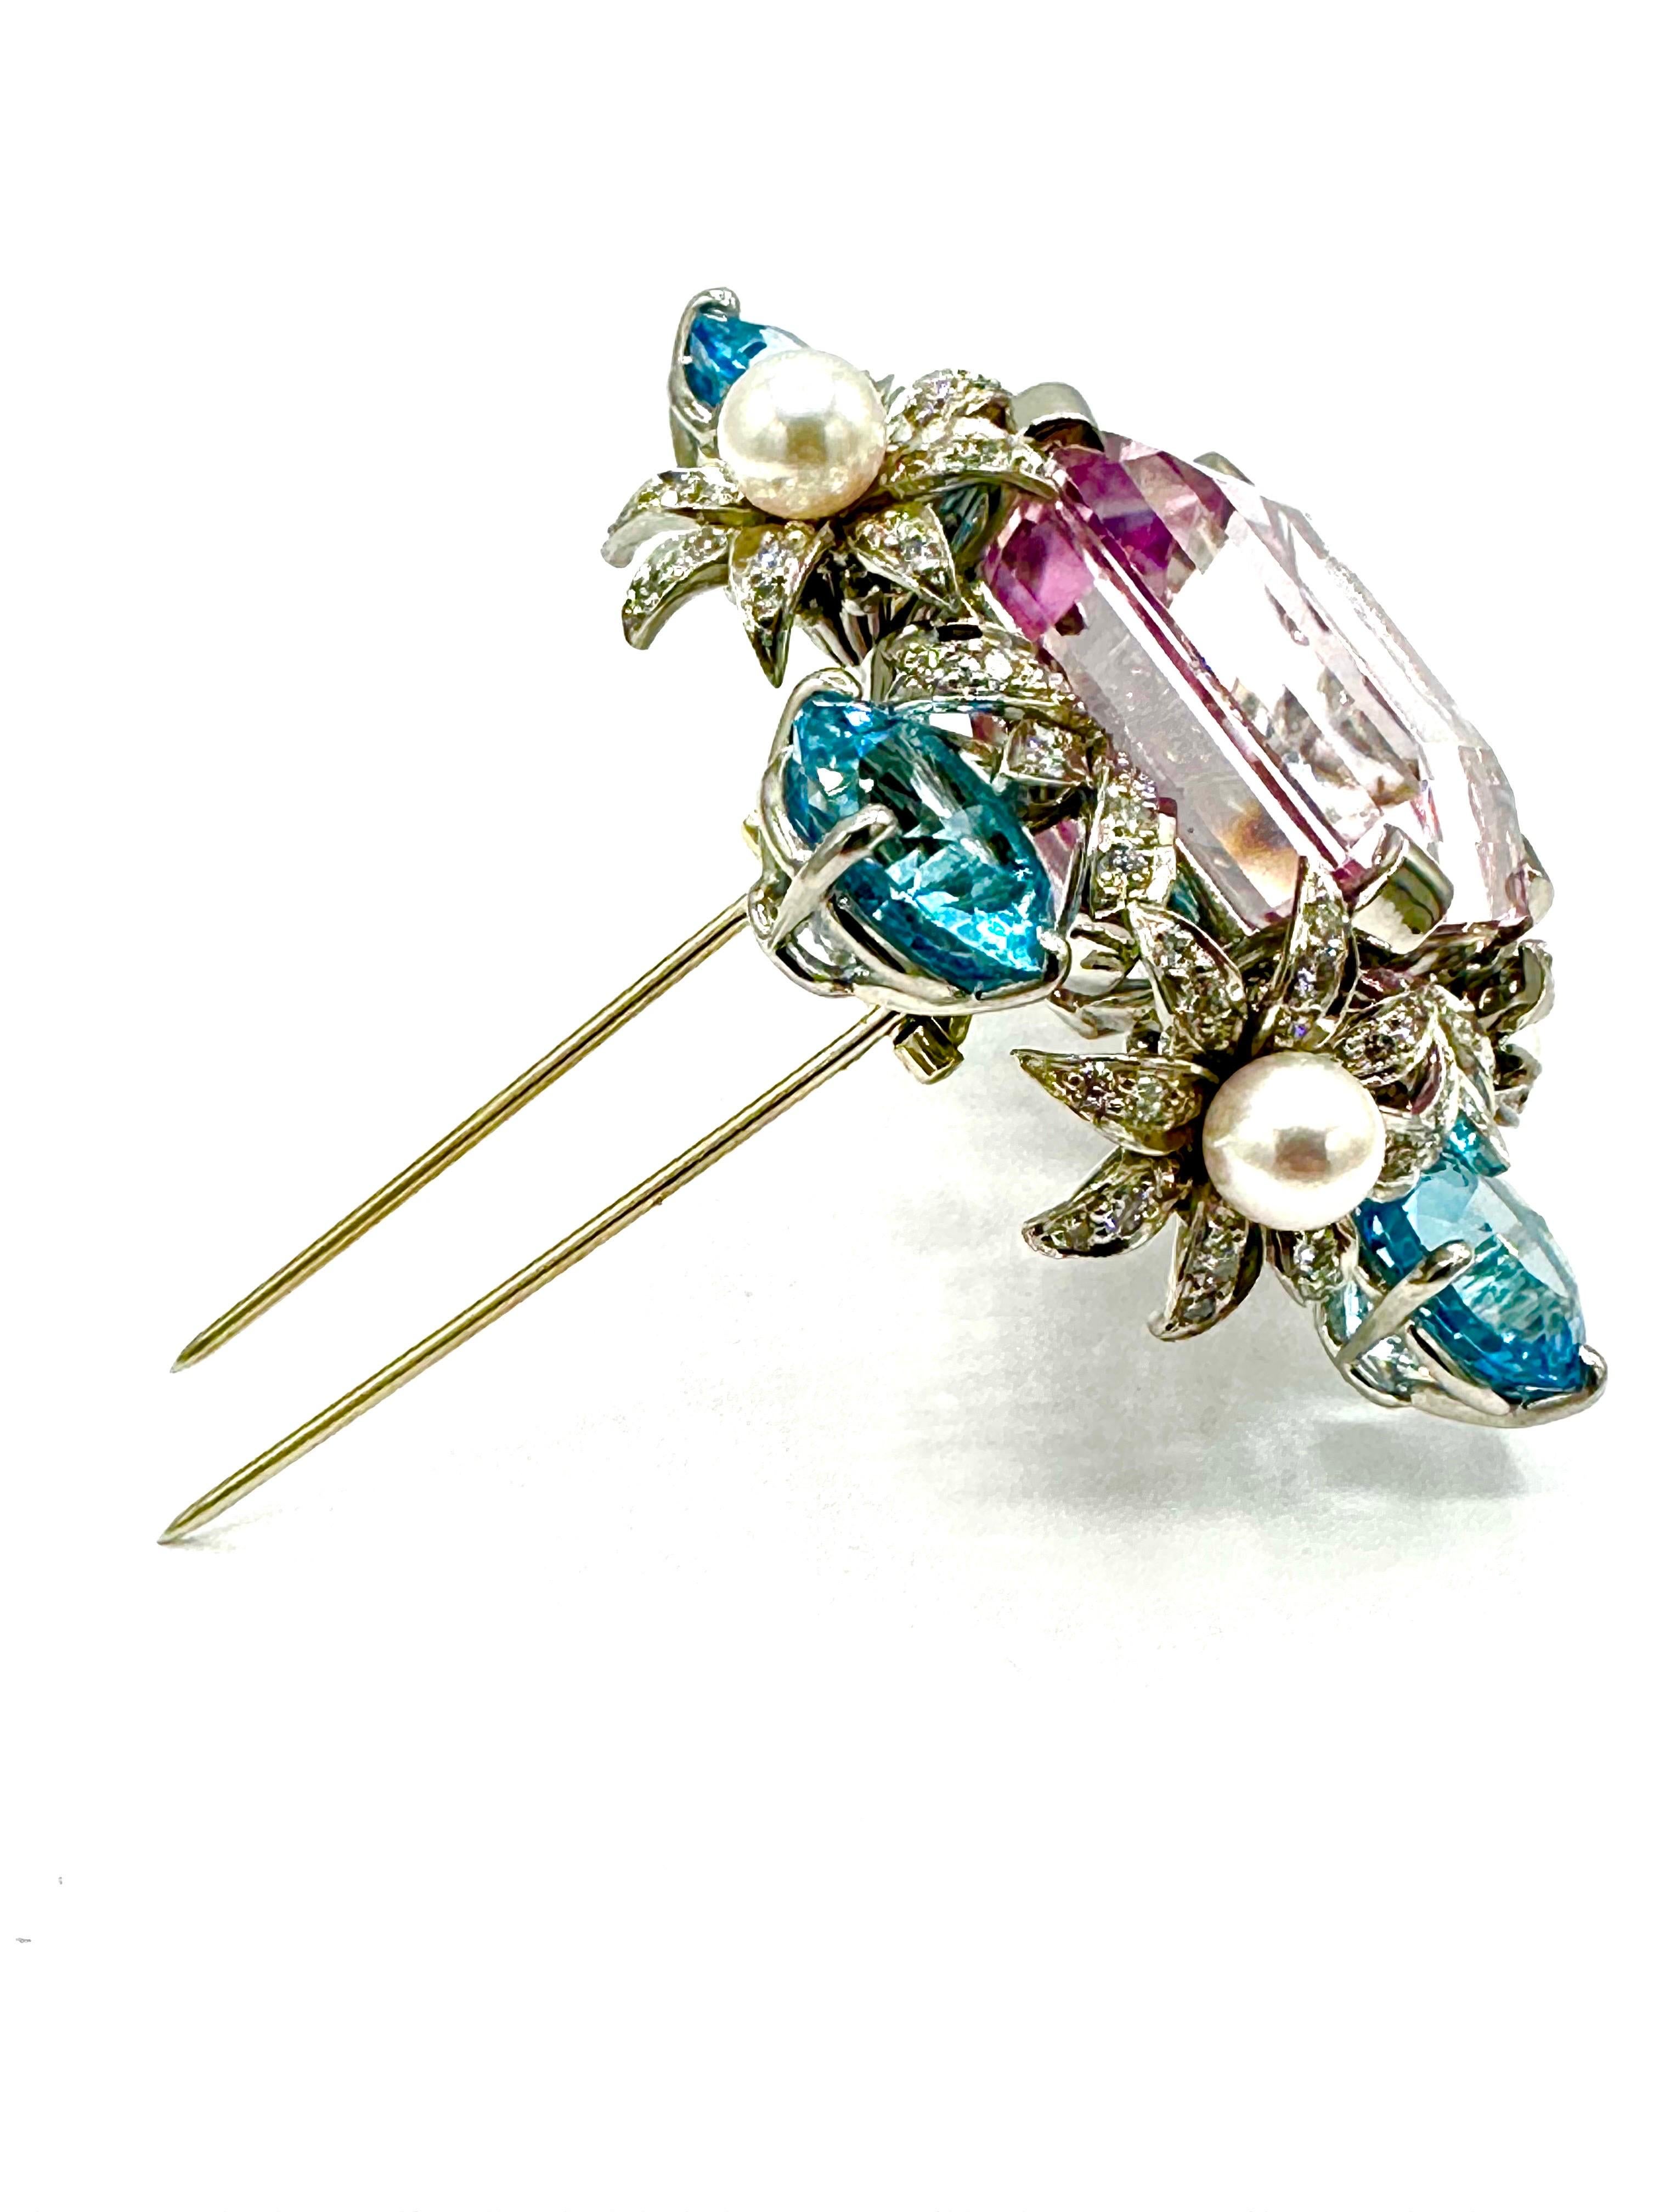 An absolutely gorgeous brooch that everyone will notice!  Designed and created by Bielka, this brooch features a 60.00 carat step cut Kunzite, framed in a Diamond, Pearl and Blue Topaz floral motif made all in platinum.  The Diamonds are round